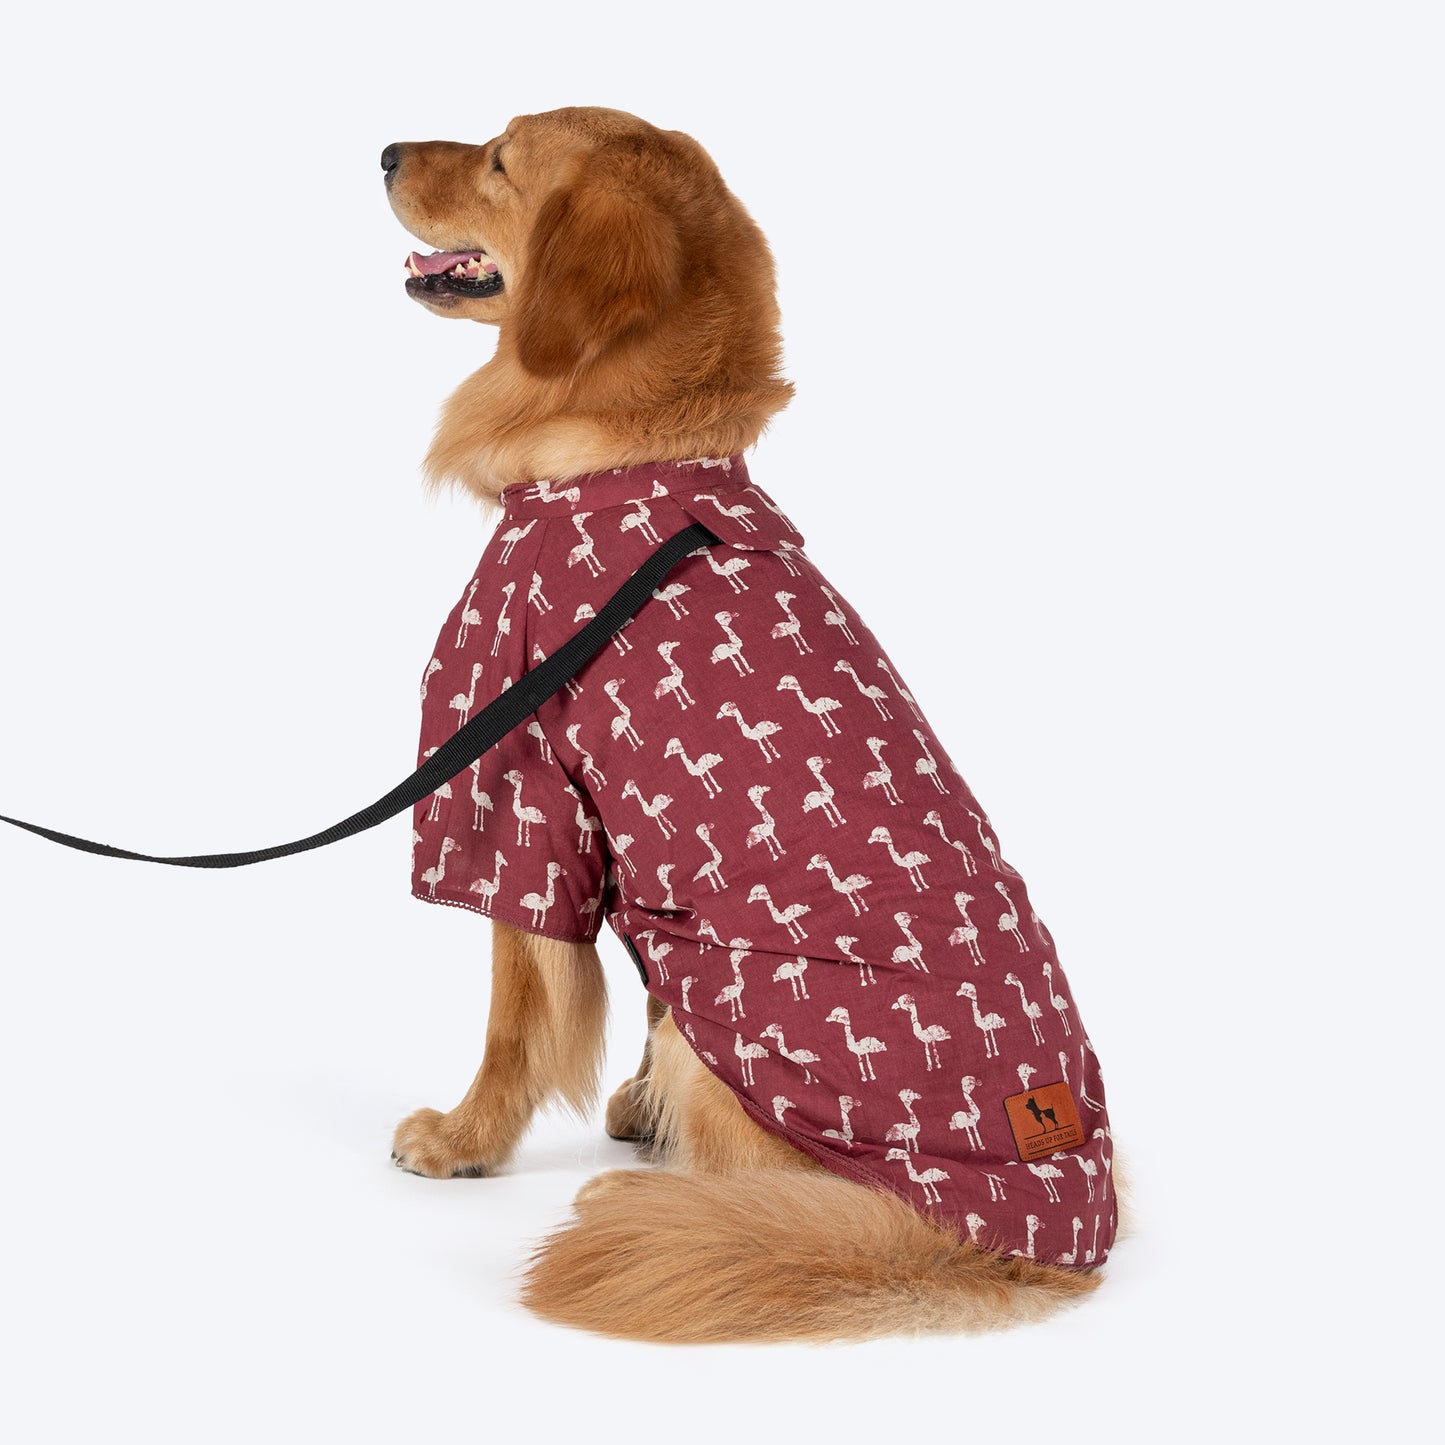 HUFT Printed Shirt For Dog - Red - Heads Up For Tails